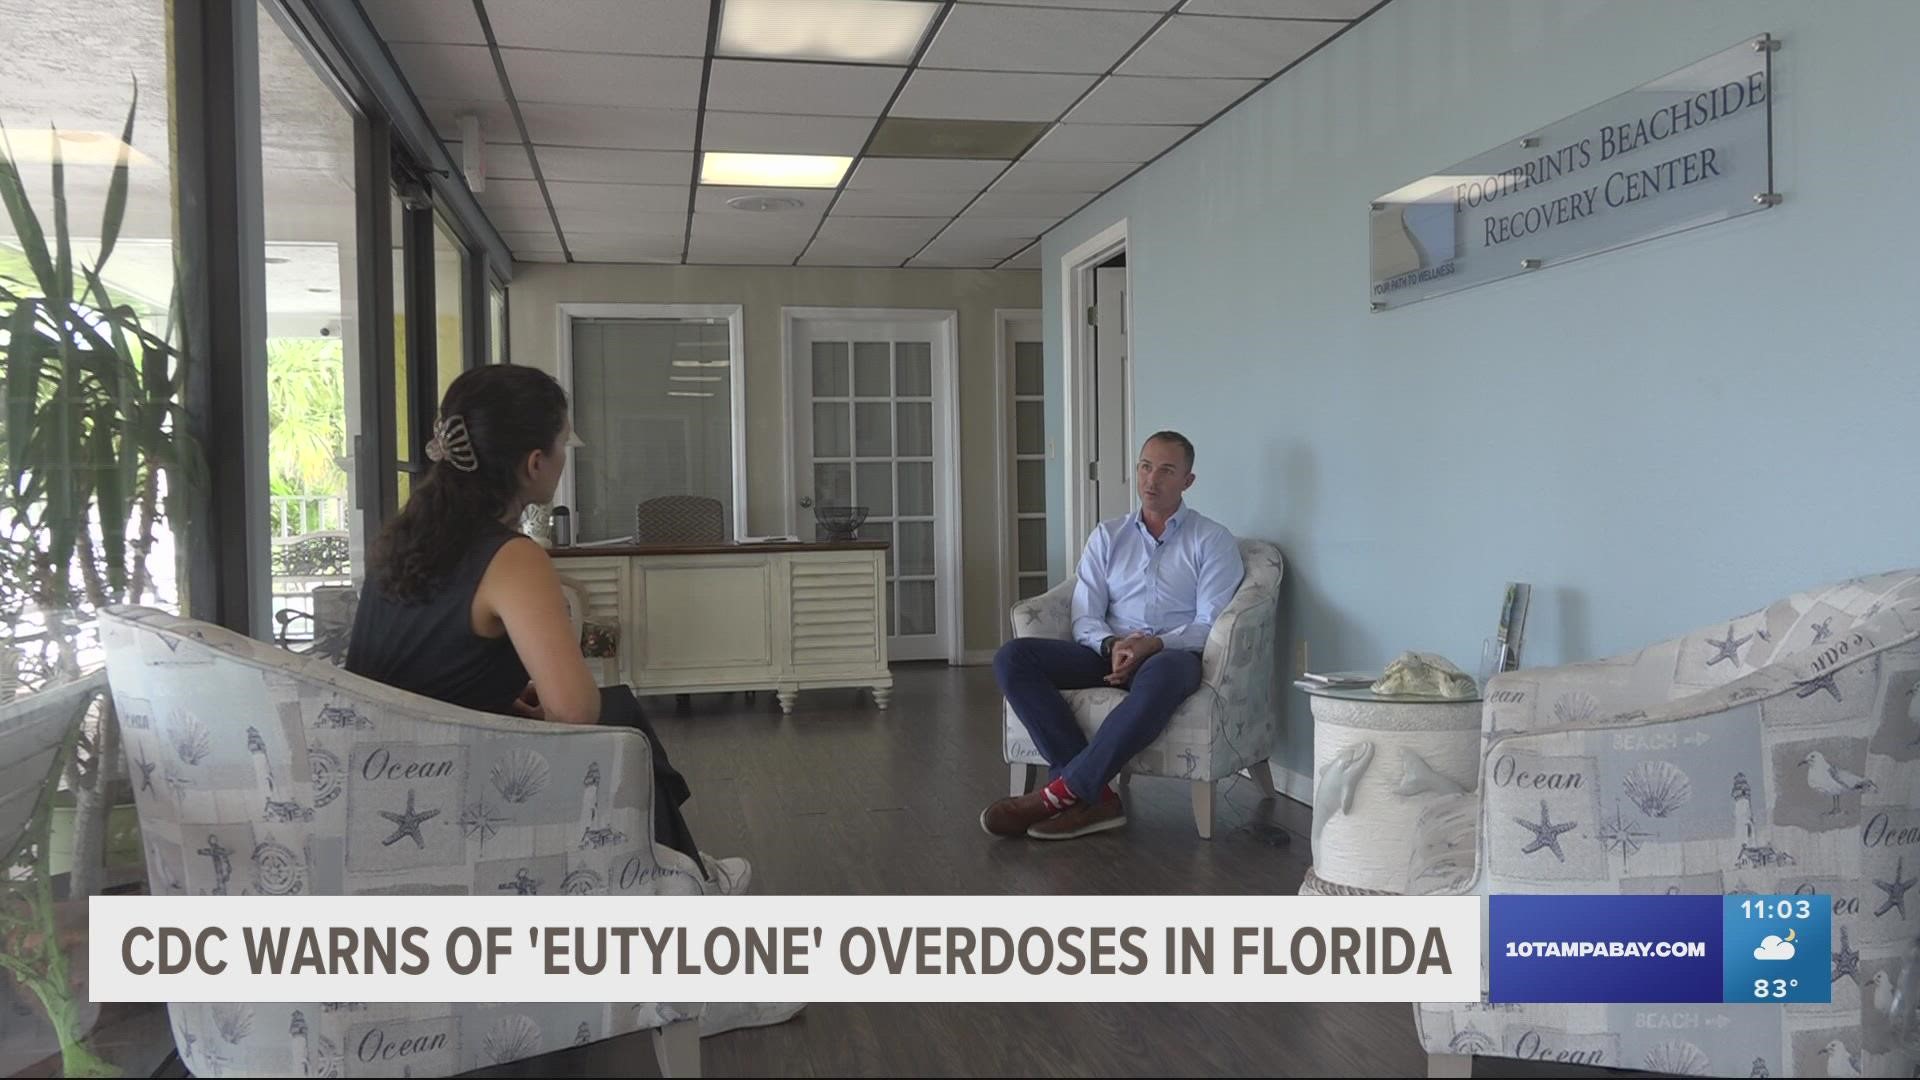 According to the CDC, in 2020, 75% eutylone-related fatal overdoses took place in either Florida or Maryland. The drug has rapidly emerged in the U.S. since 2017.